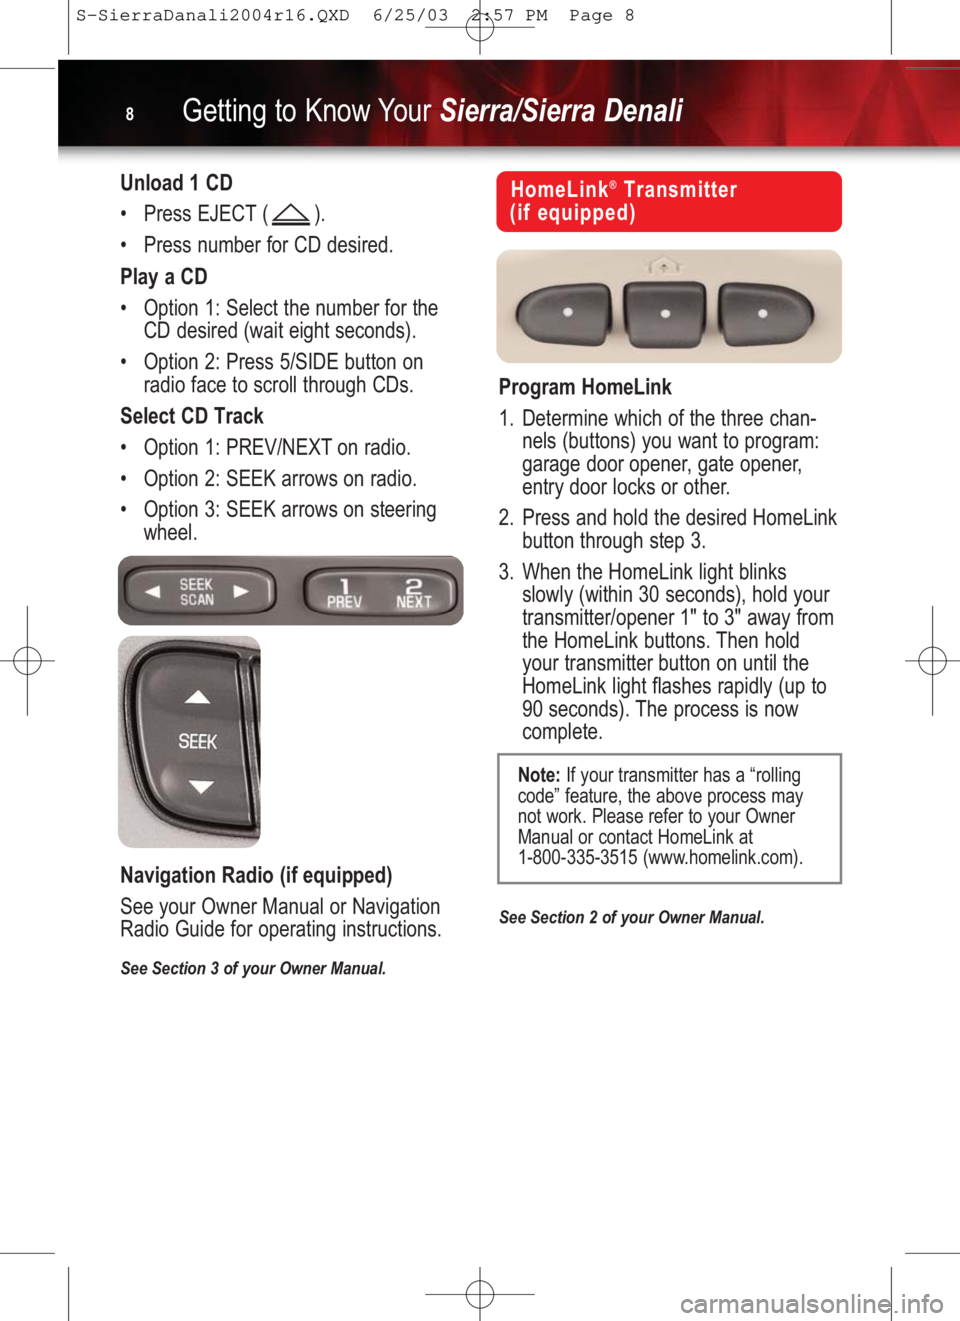 GMC SIERRA 2004  Get To Know Guide Getting to Know YourSierra/Sierra Denali8
HomeLink®Transmitter 
(if equipped)
Program HomeLink
1. Determine which of the three chan-
nels (buttons) you want to program:
garage door opener, gate opene